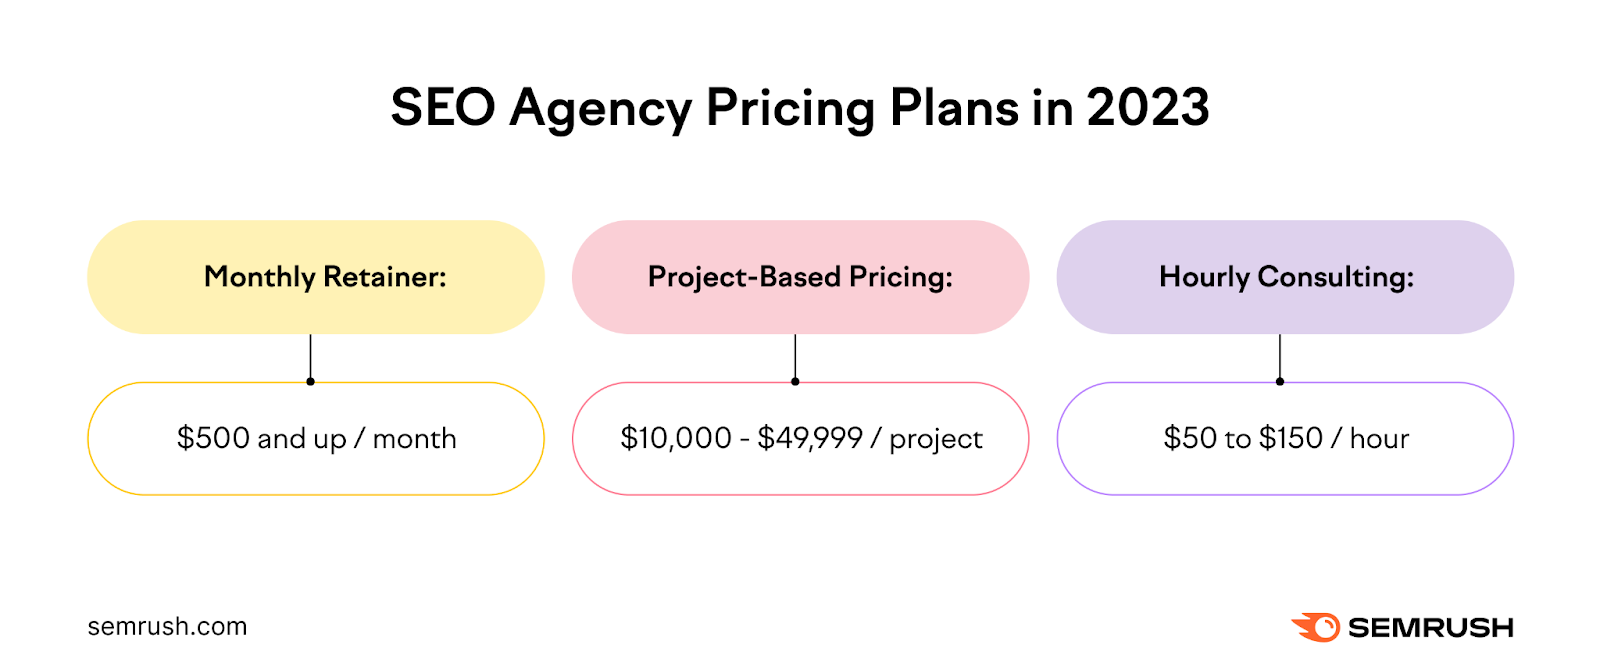 An infographic by Semrush showing SEO agency pricing plans in 2023